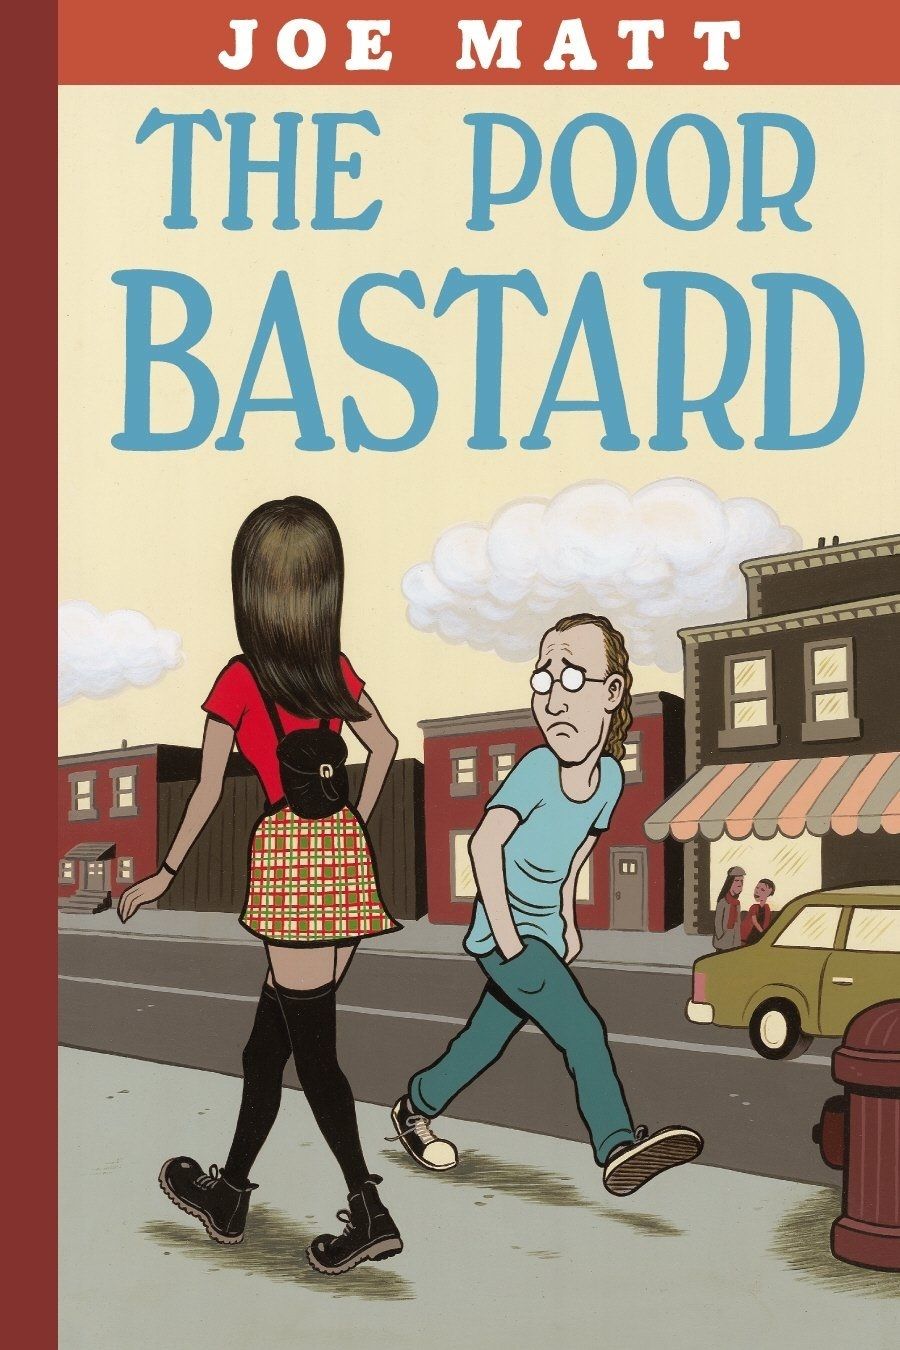 The cover of The Poor Bastard